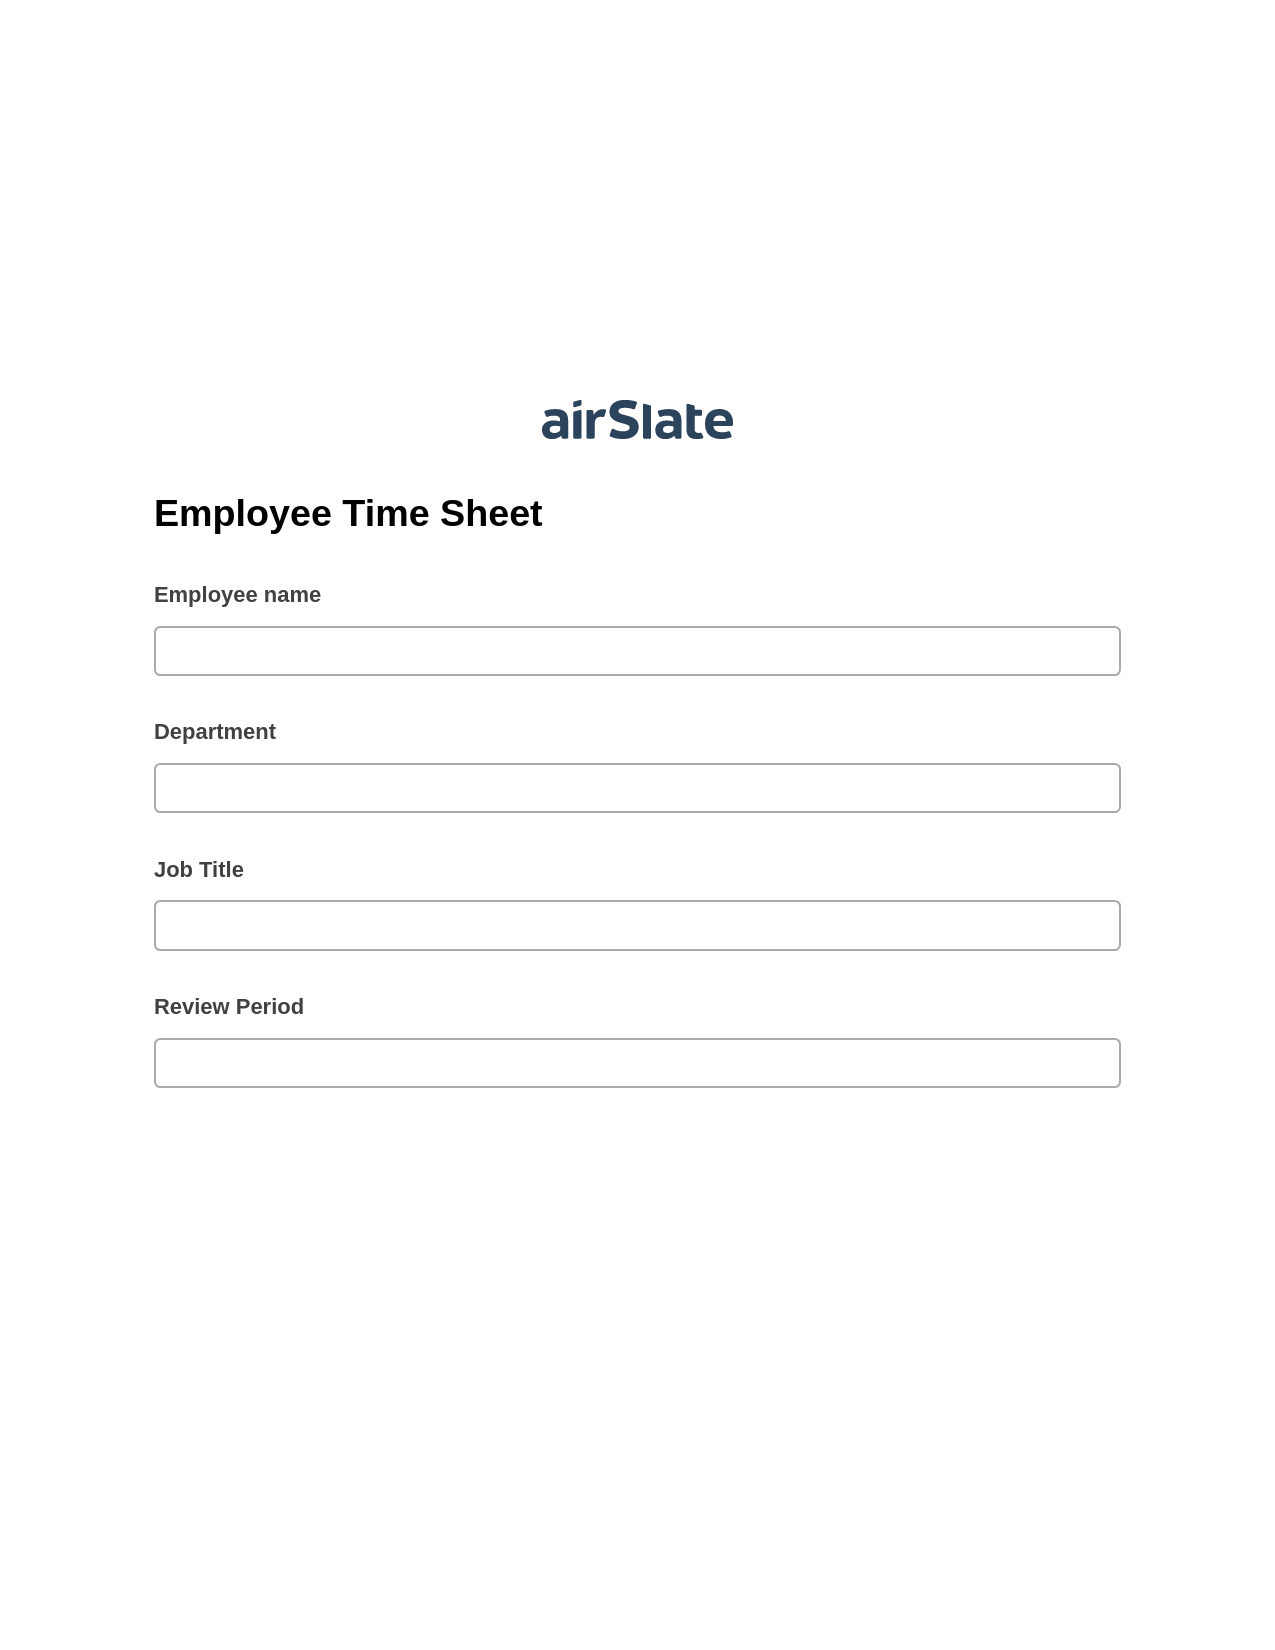 Employee Time Sheet Pre-fill Dropdowns from Excel Bot, Create Slate Reminder Bot, Archive to Google Drive Bot